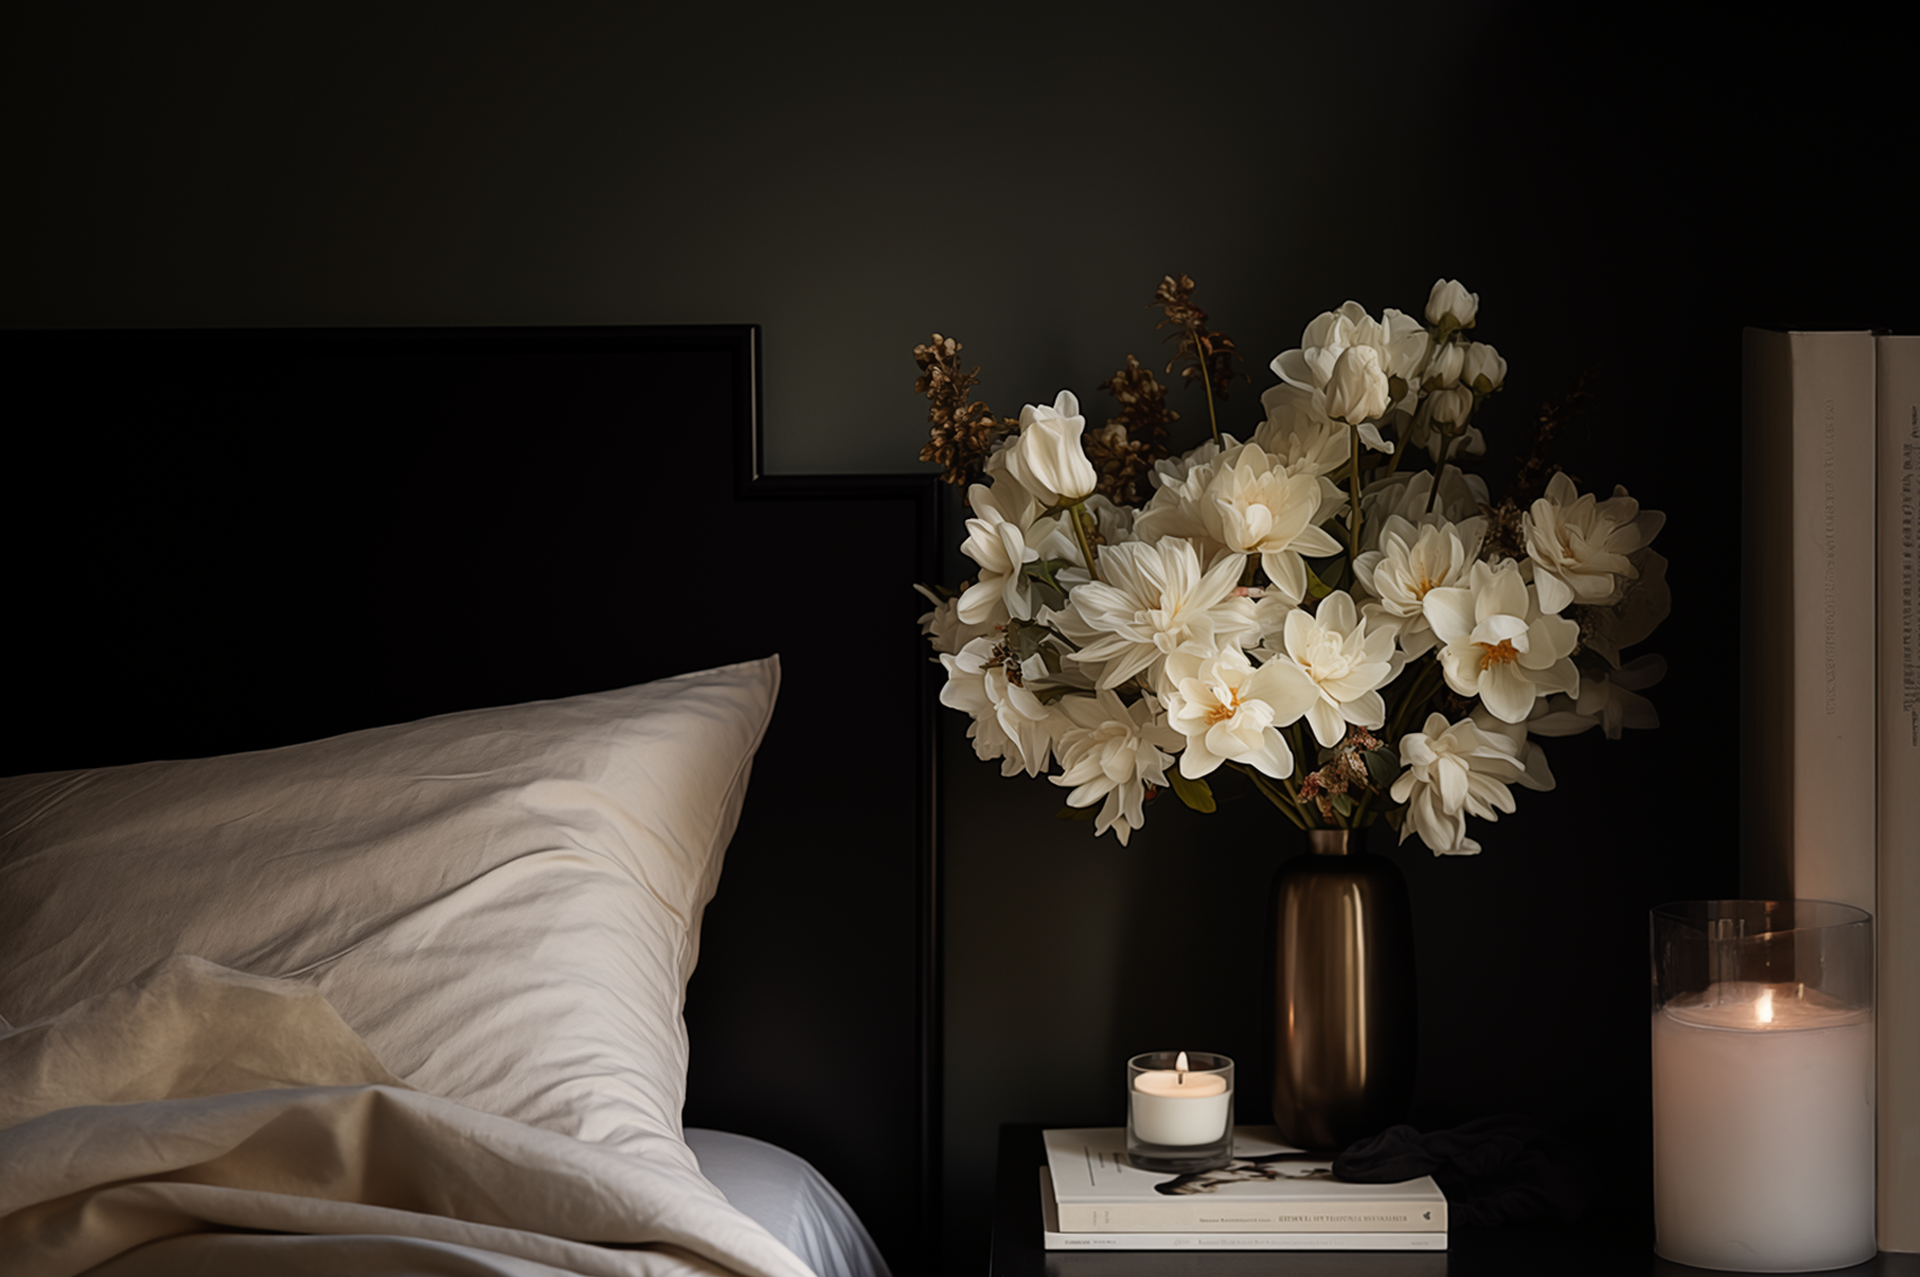 A messy bed with white sheets and a bedside table with books candles and a vase of white flowers